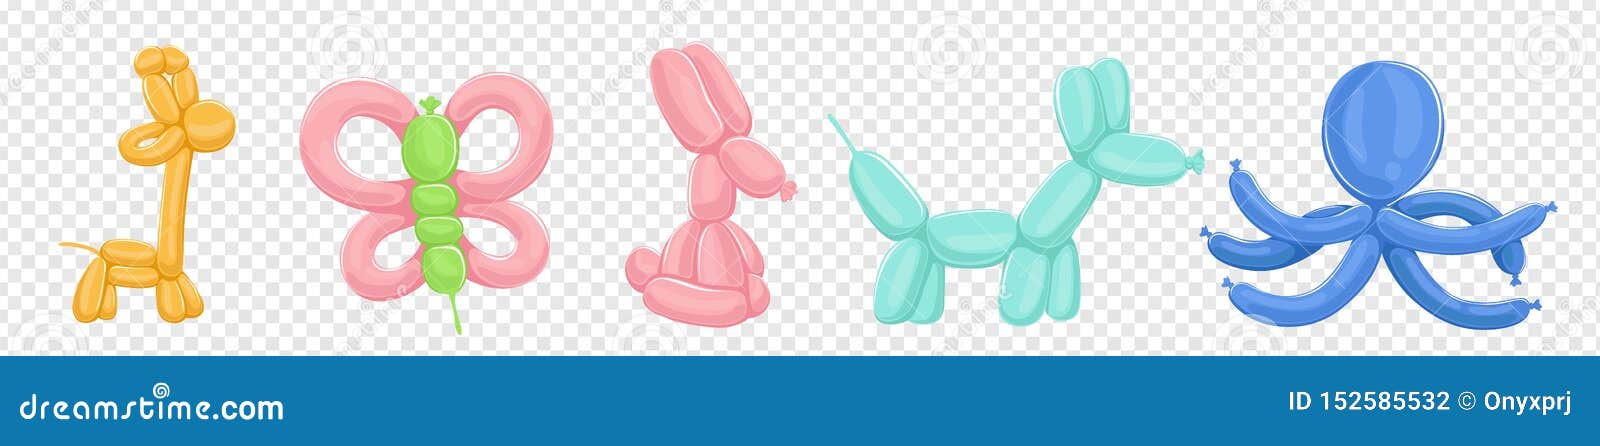 Download Balloons Animals Vector Isolated On Transparent Background ...